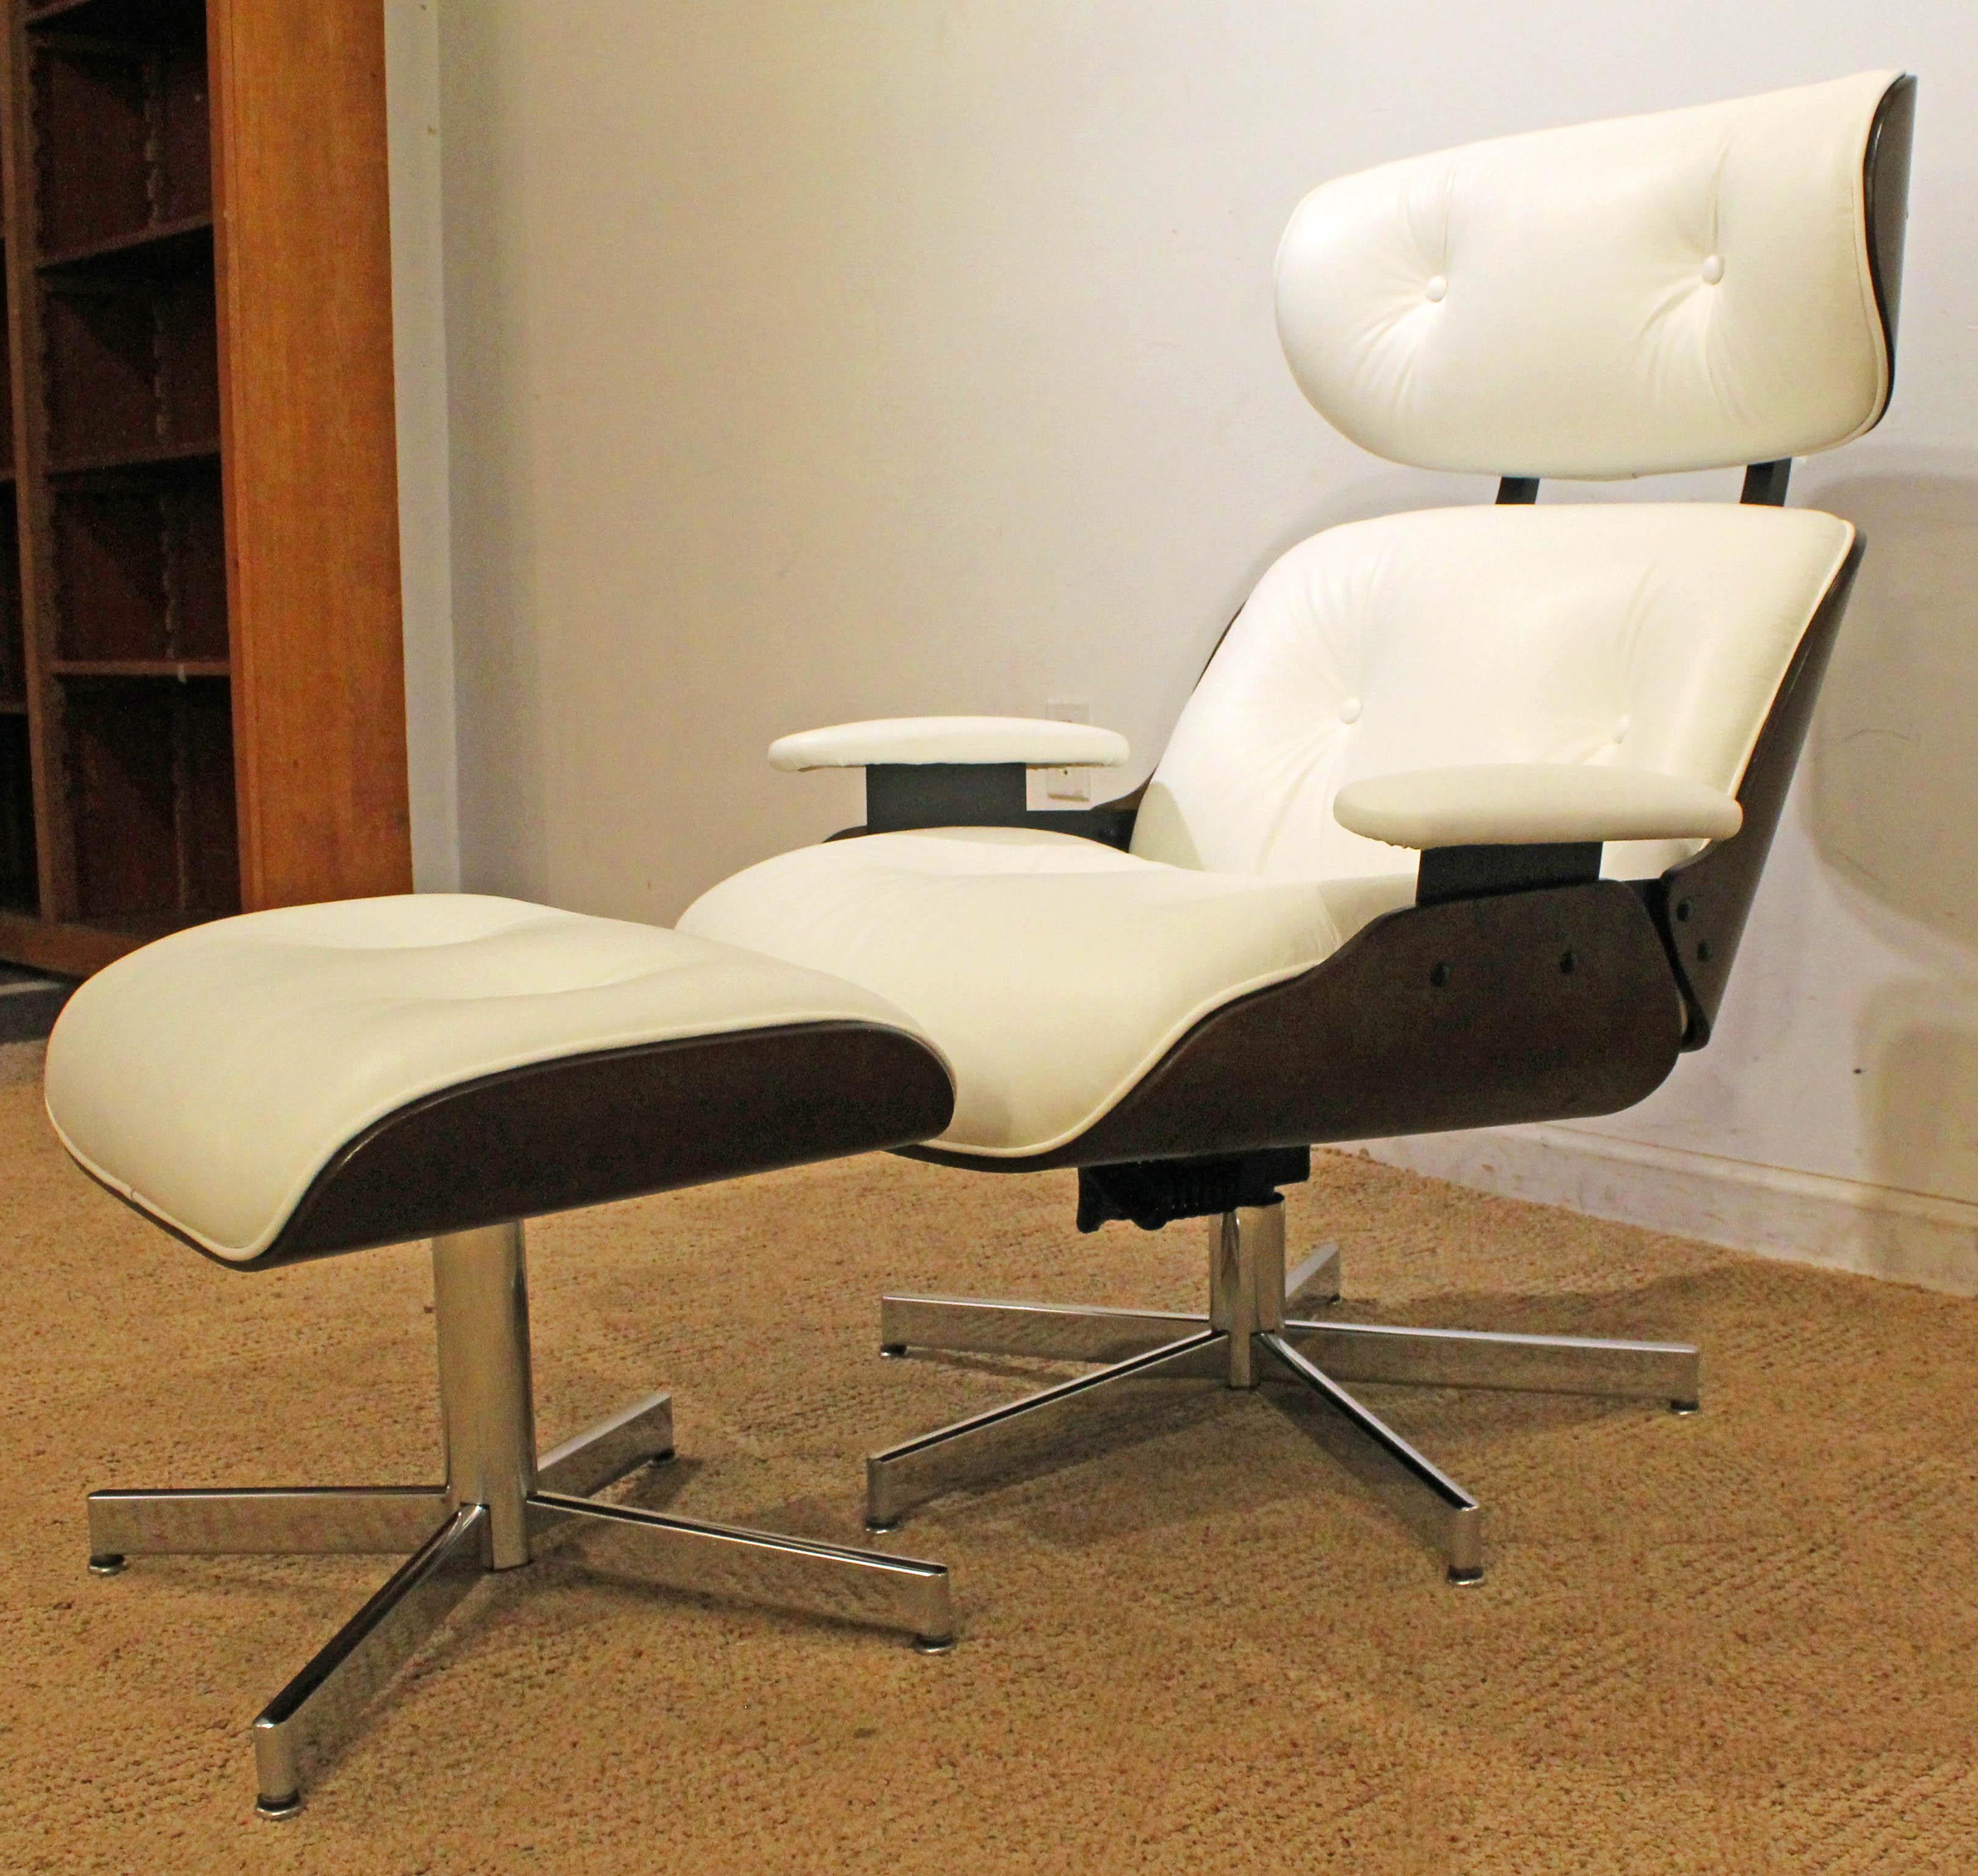 What a find. Offered is a midcentury Danish modern Selig Eames leather swivel lounge chair/ottoman. This chair is an original, signed Selig and has been completely restored with new white Redondo leather. It is in excellent condition, like